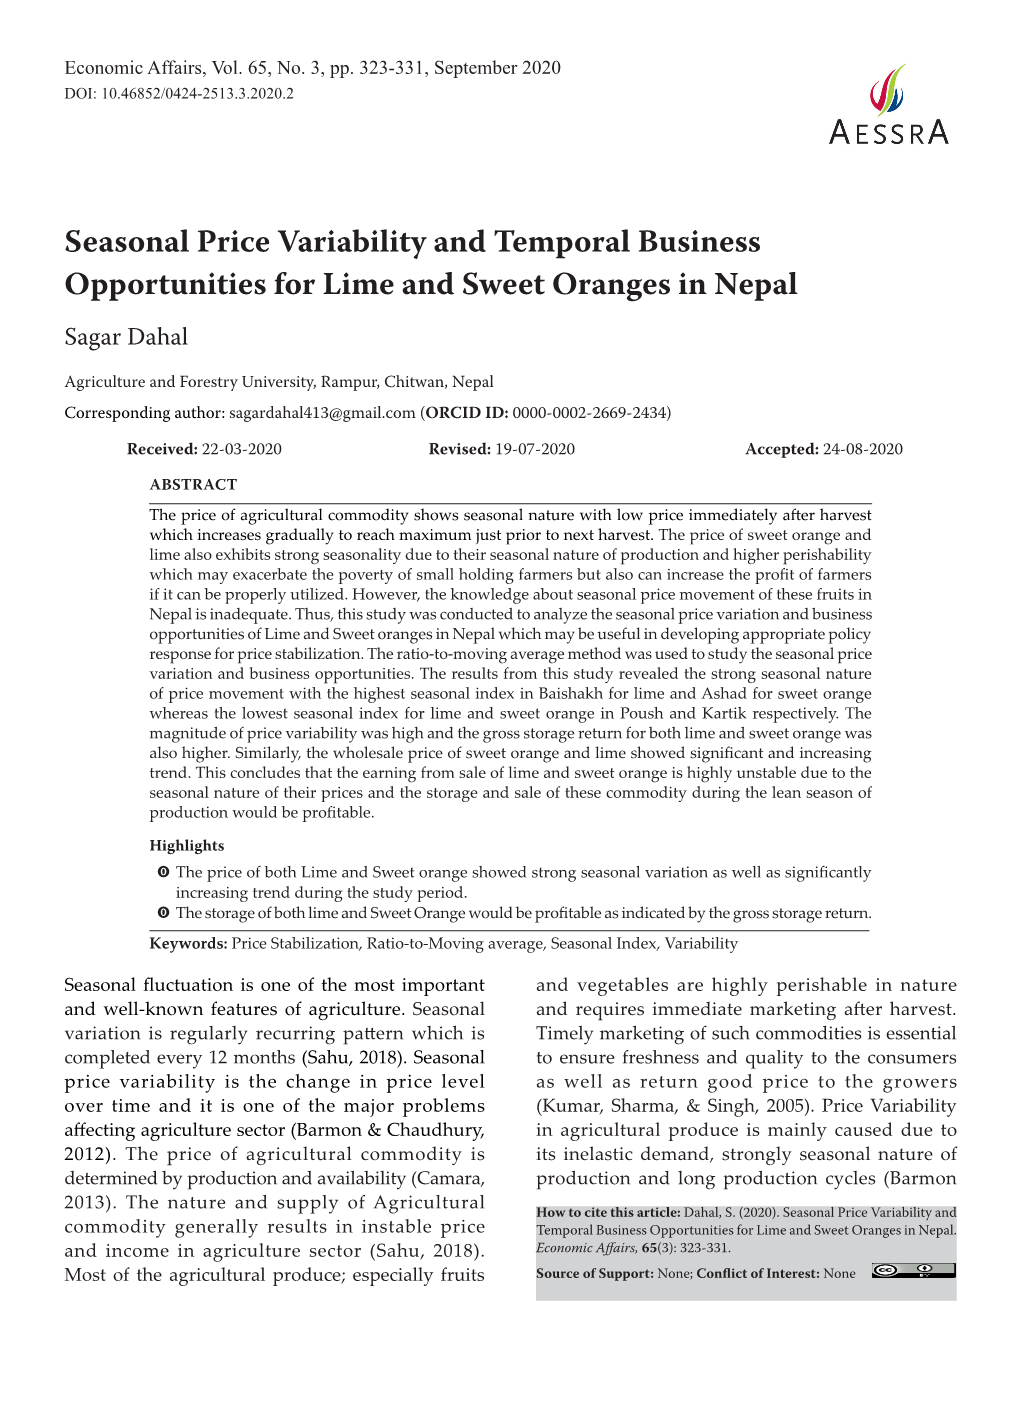 Seasonal Price Variability and Temporal Business Opportunities for Lime and Sweet Oranges in Nepal Sagar Dahal